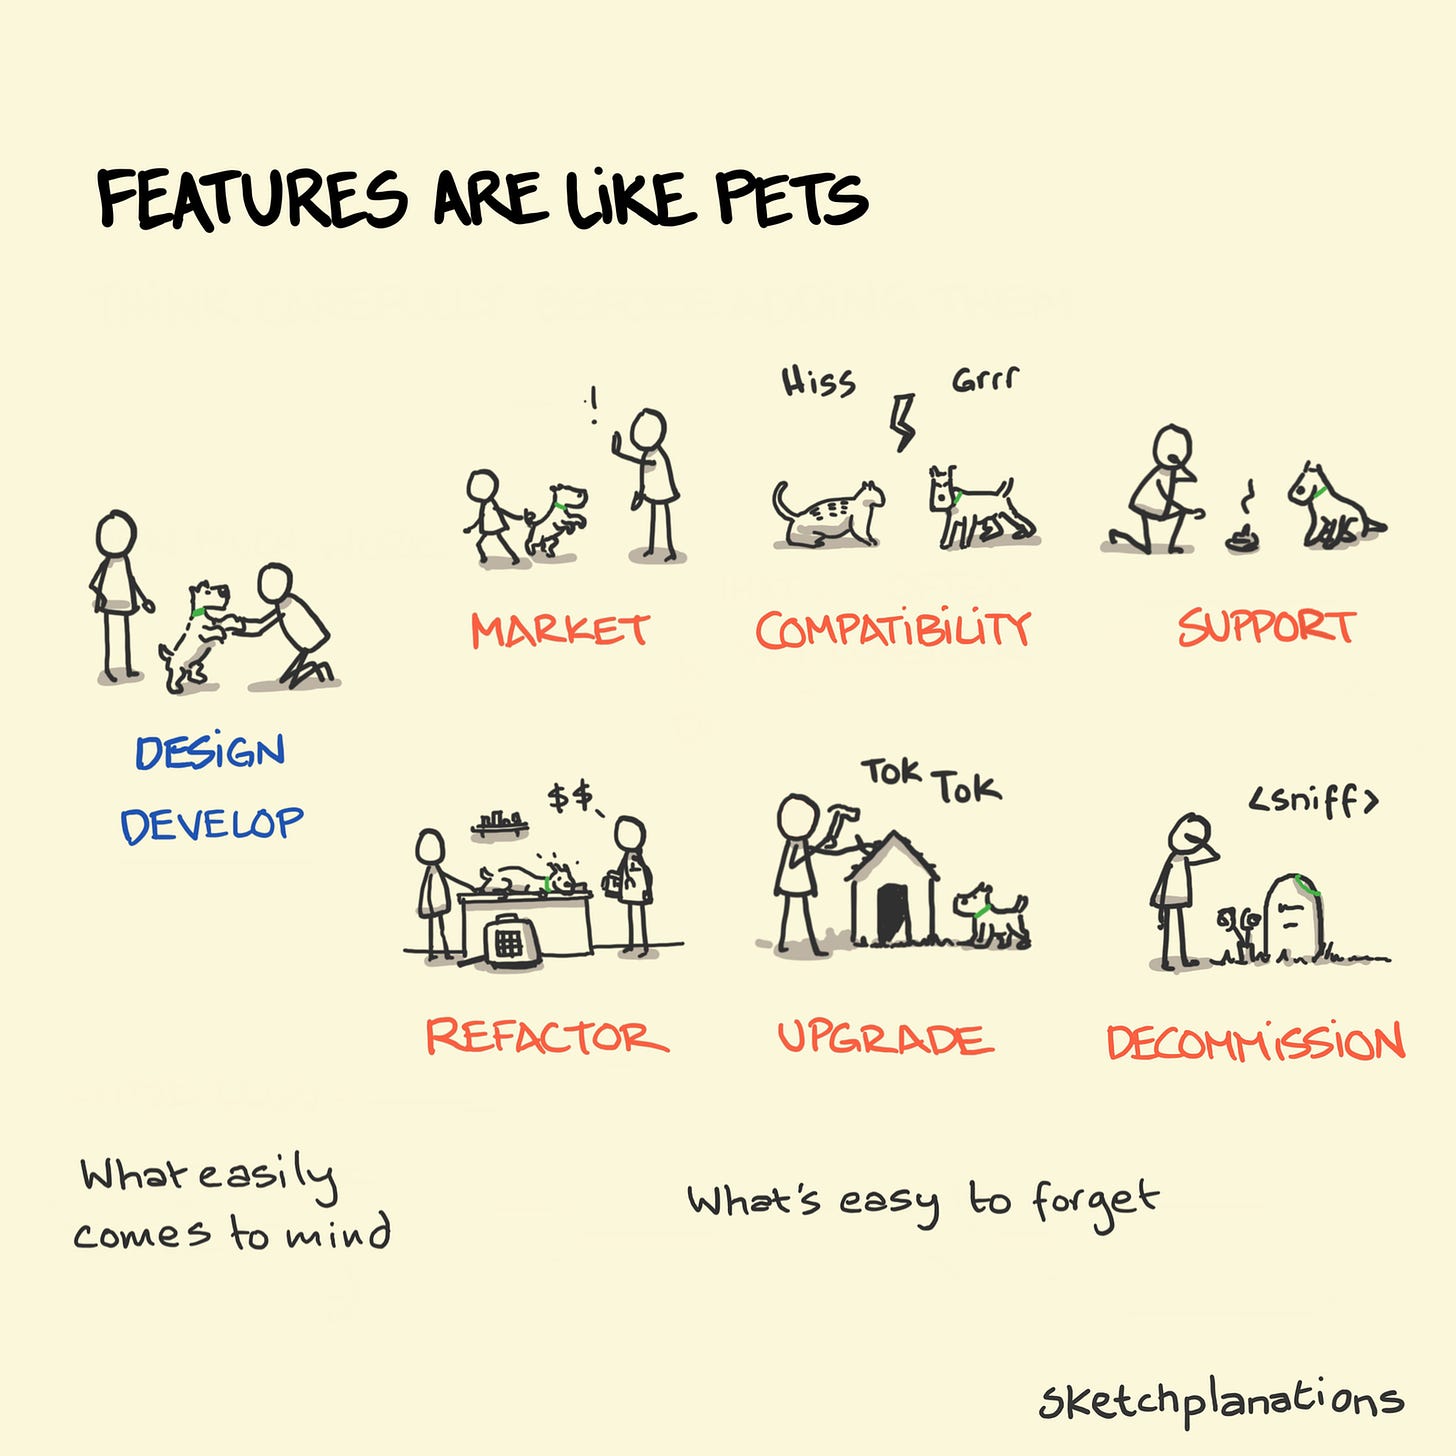 Features are like pets - Sketchplanations